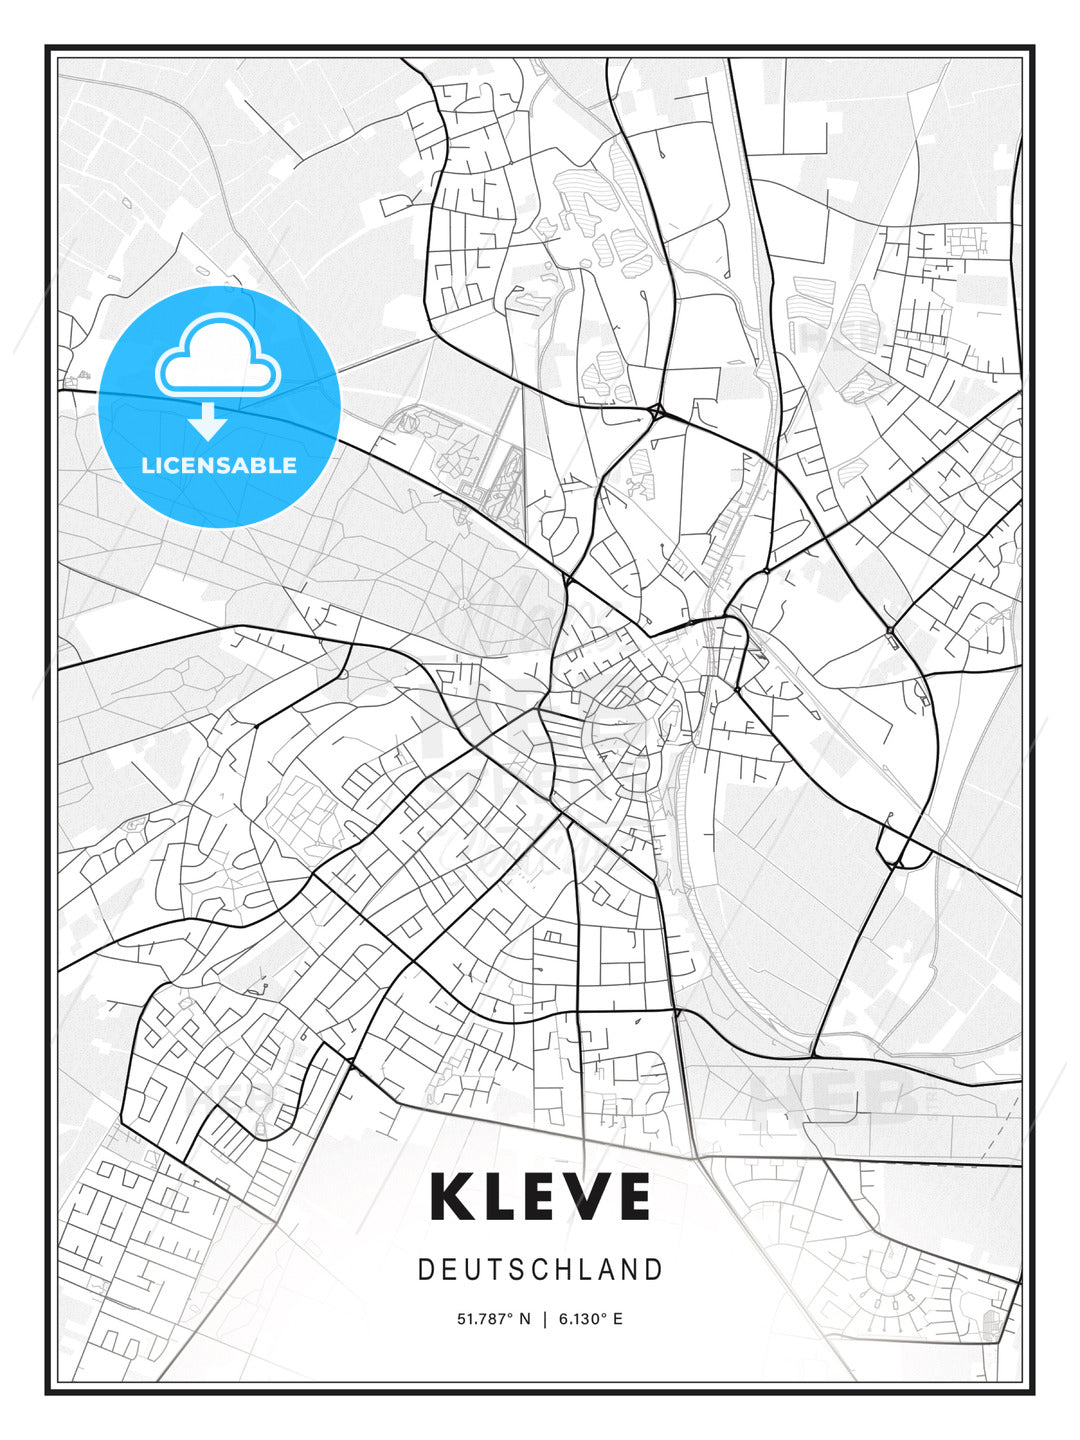 Kleve, Germany, Modern Print Template in Various Formats - HEBSTREITS Sketches